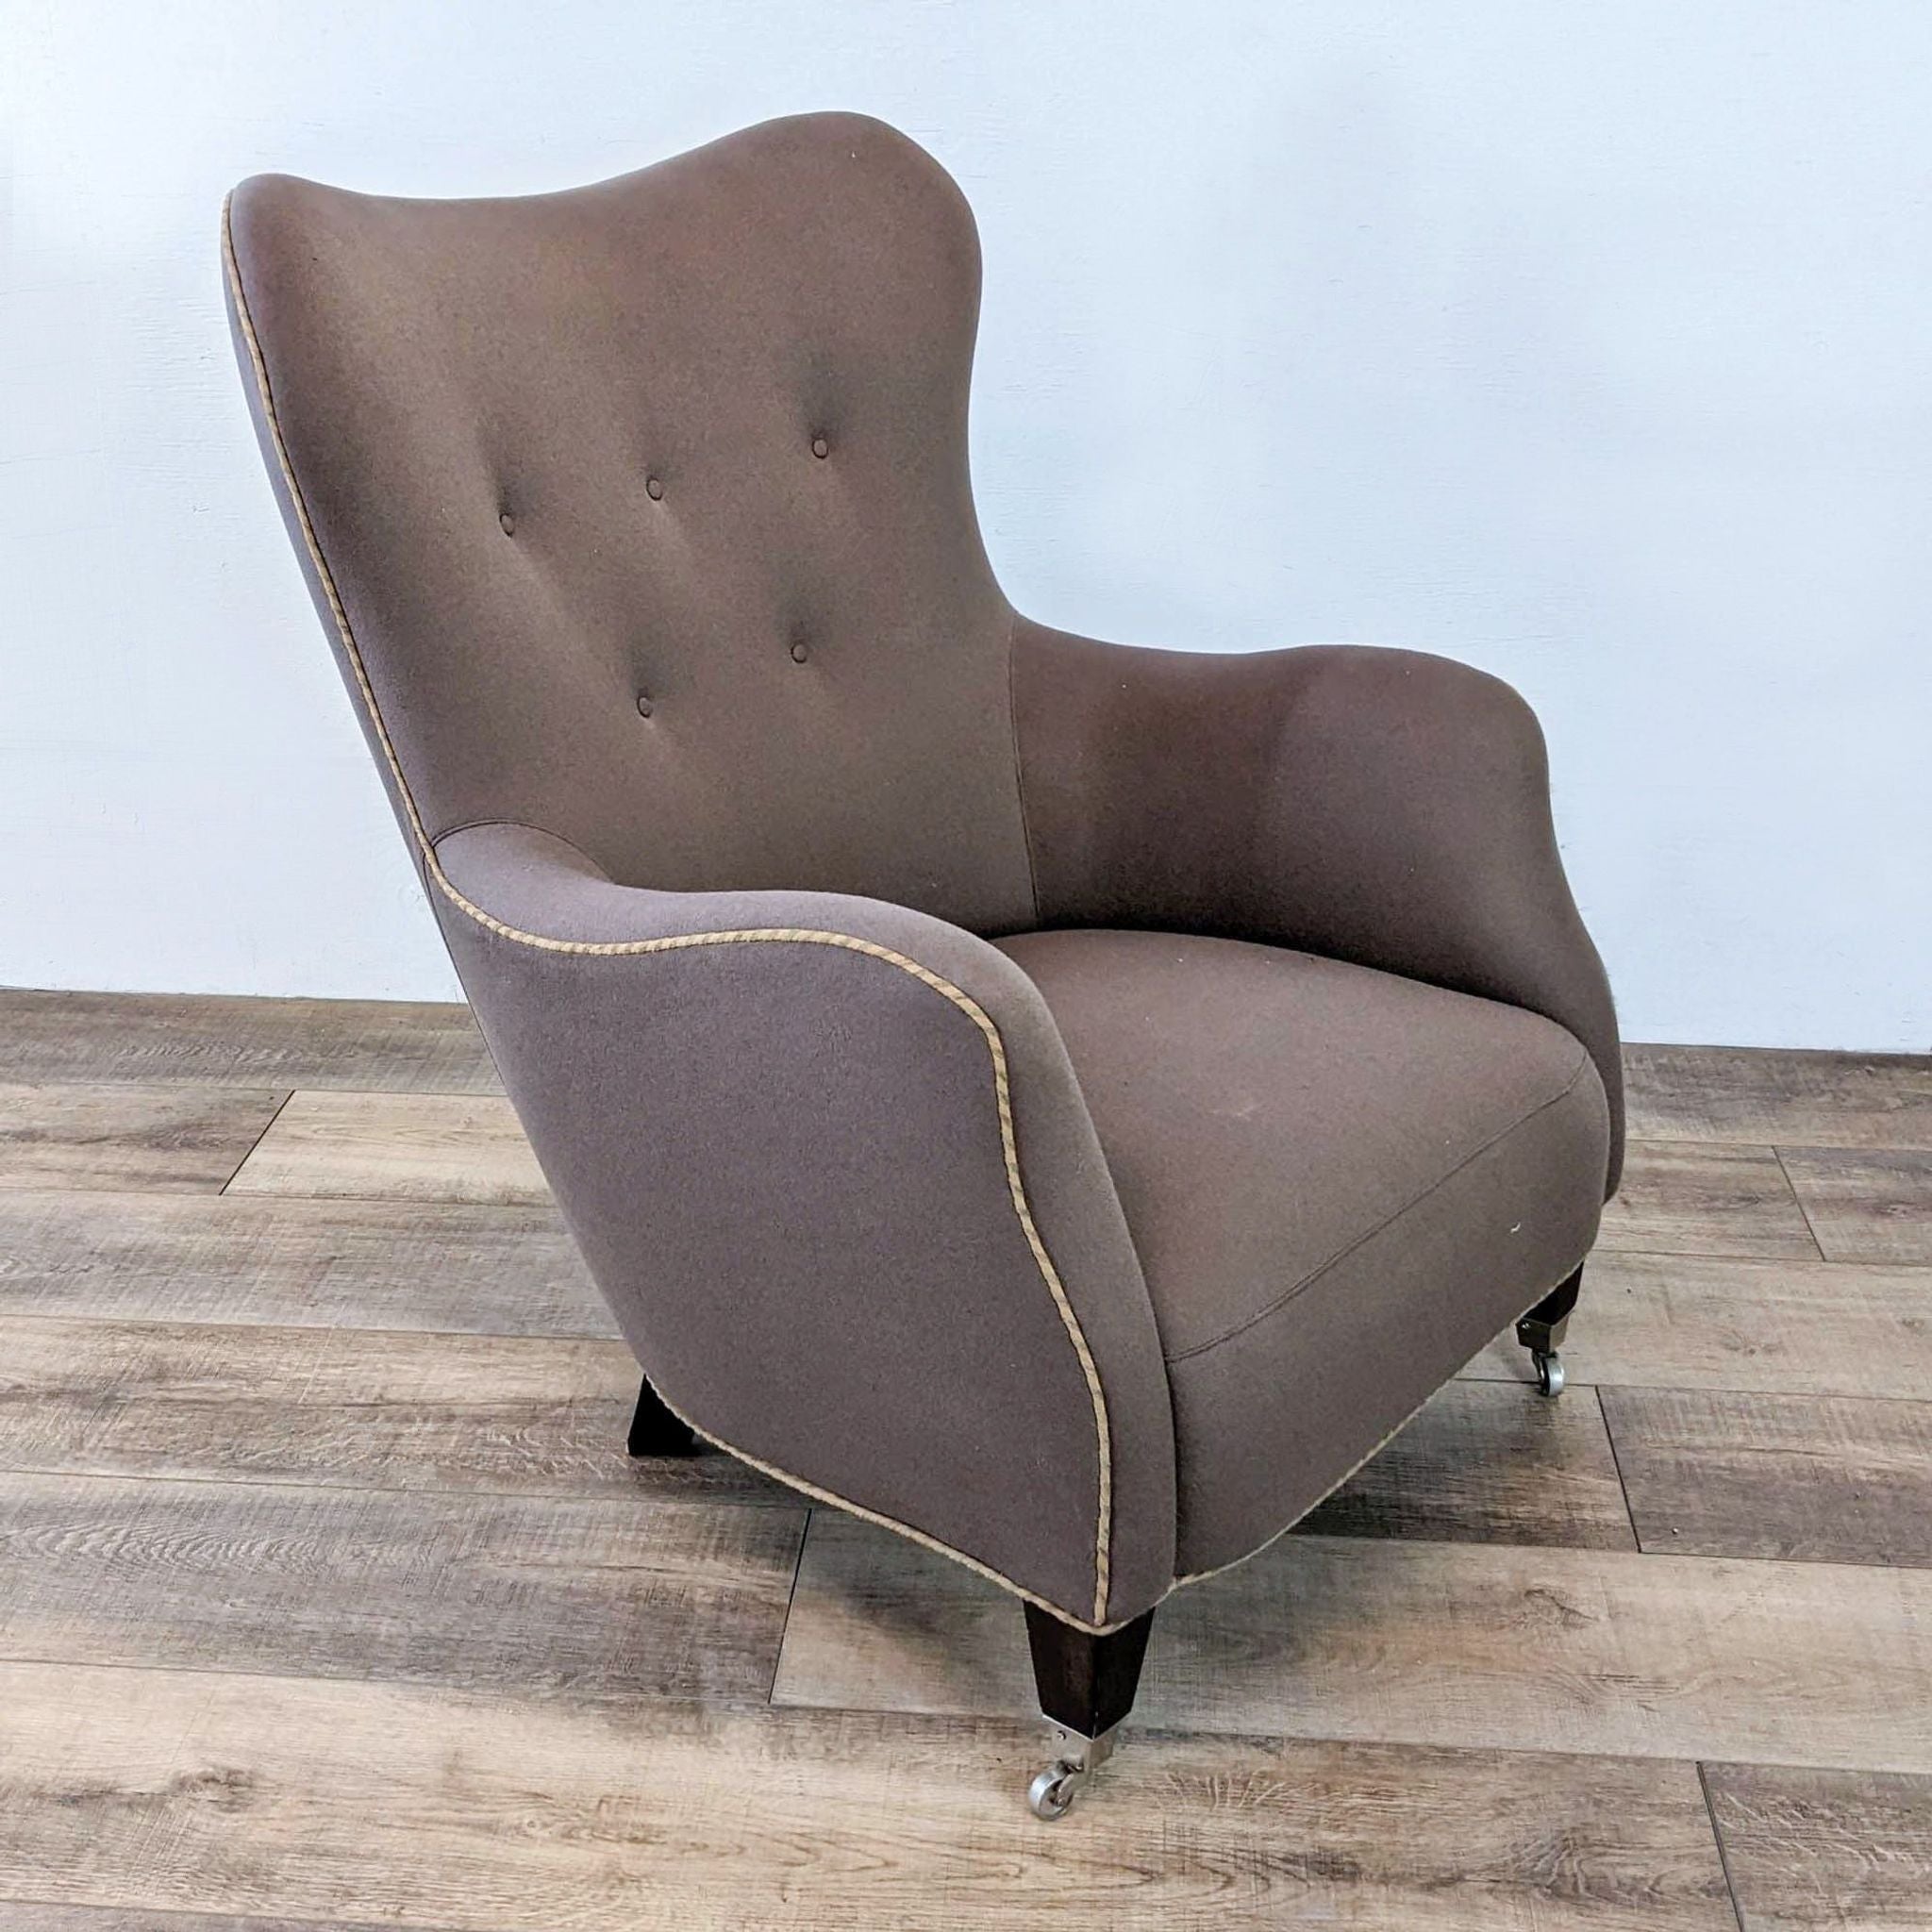 Alt text 2: A single RomI mini lounge chair by Cisco Brothers, showcasing its tufted back, contrasting piping, and boot casters against a simple backdrop.